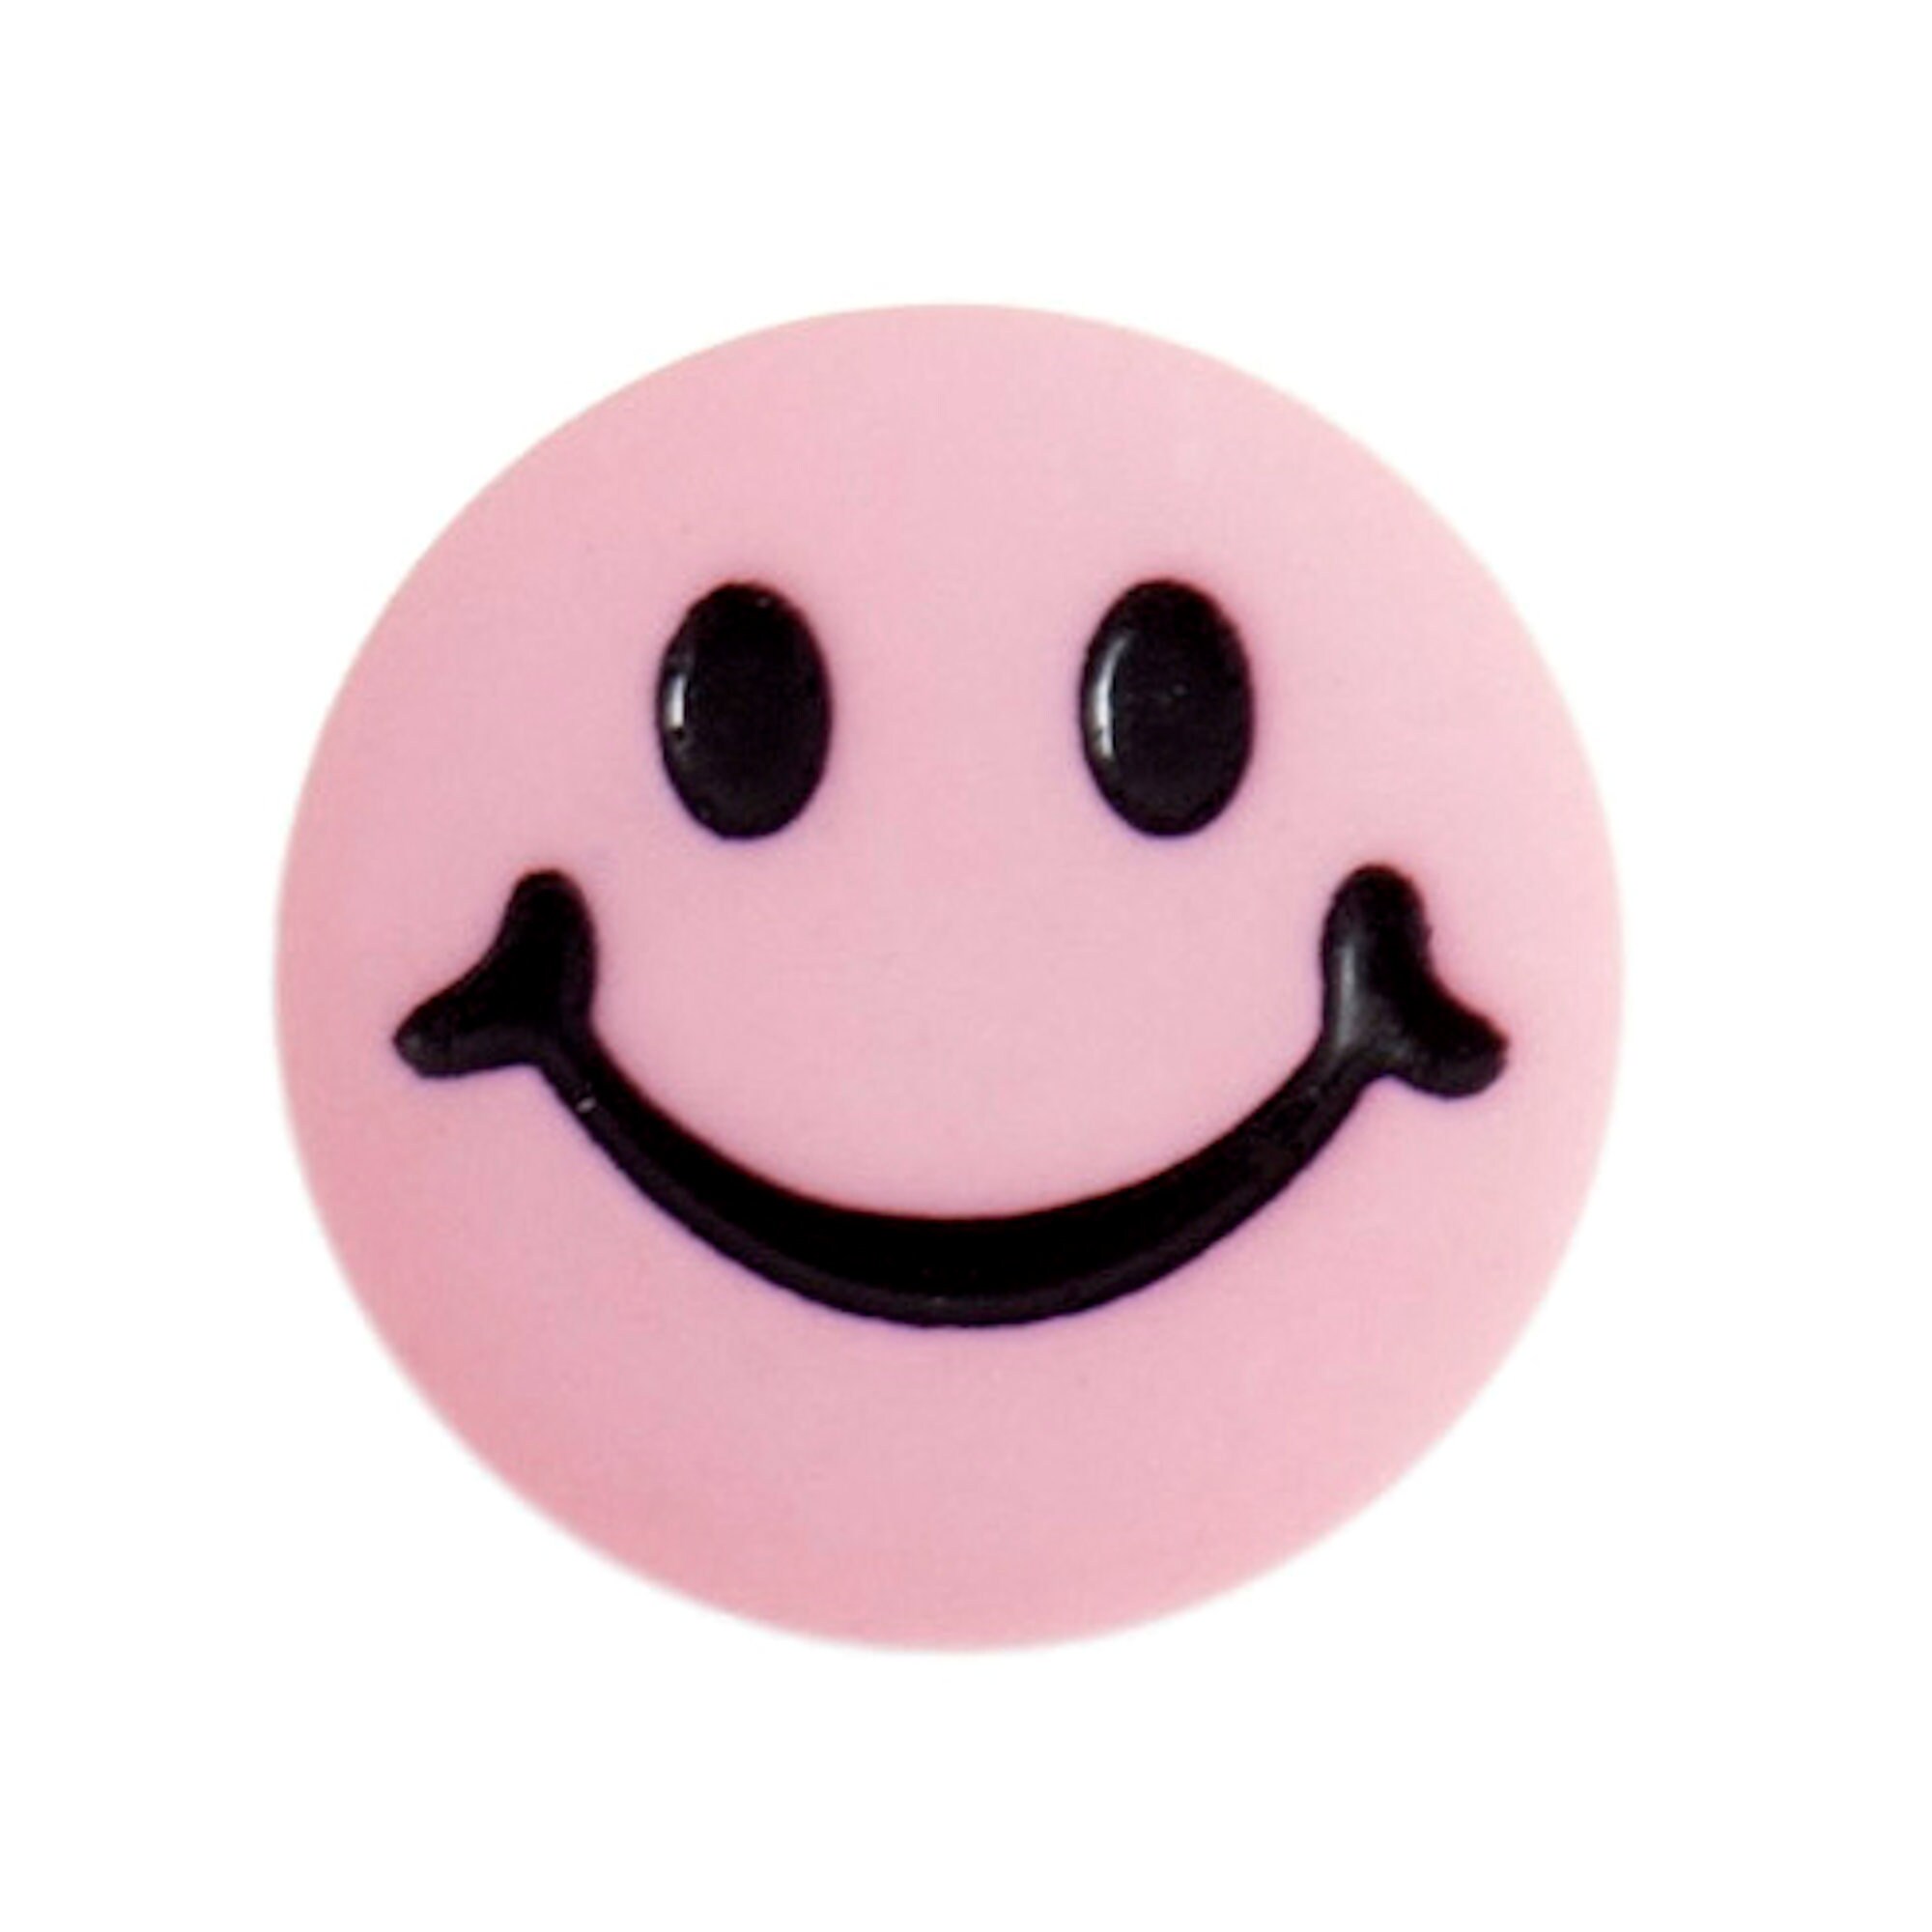 10 x 15mm pink smiley face emoticon buttons with rear shank 